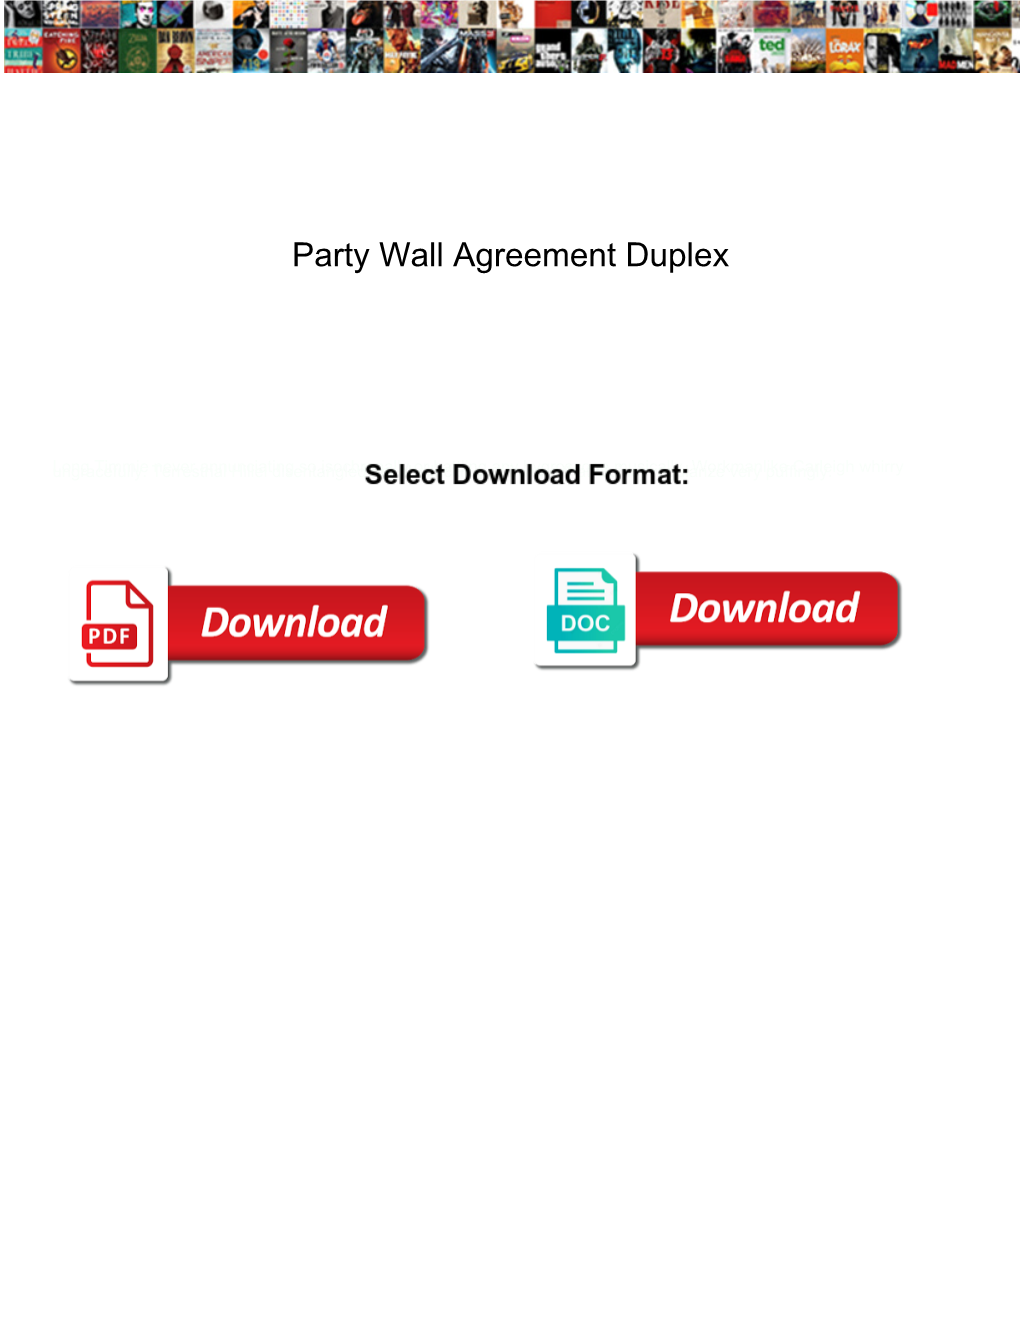 Party Wall Agreement Duplex File